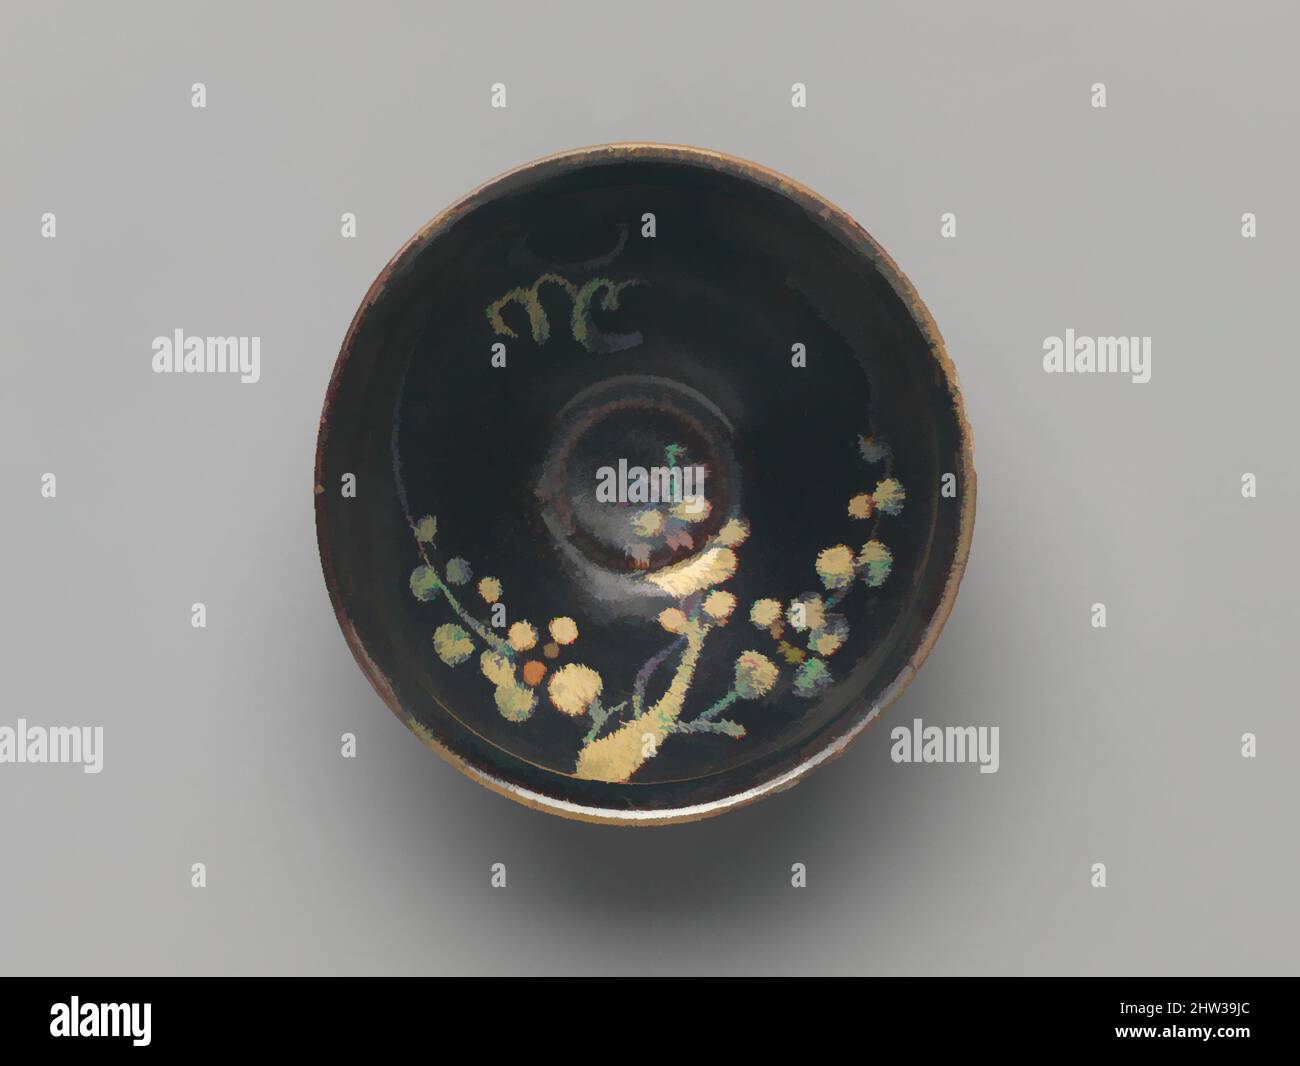 Art inspired by Tea Bowl with Crescent Moon, Clouds, and Blossoming Plum, Southern Song (1127–1279)–Yuan (1271–1368) dynasty, 13th–14th century, China, Stoneware with black and brown glaze and pigment (Jizhou ware), Diam. 4 3/4 in. (12.1 cm), Ceramics, A common theme in the decorative, Classic works modernized by Artotop with a splash of modernity. Shapes, color and value, eye-catching visual impact on art. Emotions through freedom of artworks in a contemporary way. A timeless message pursuing a wildly creative new direction. Artists turning to the digital medium and creating the Artotop NFT Stock Photo